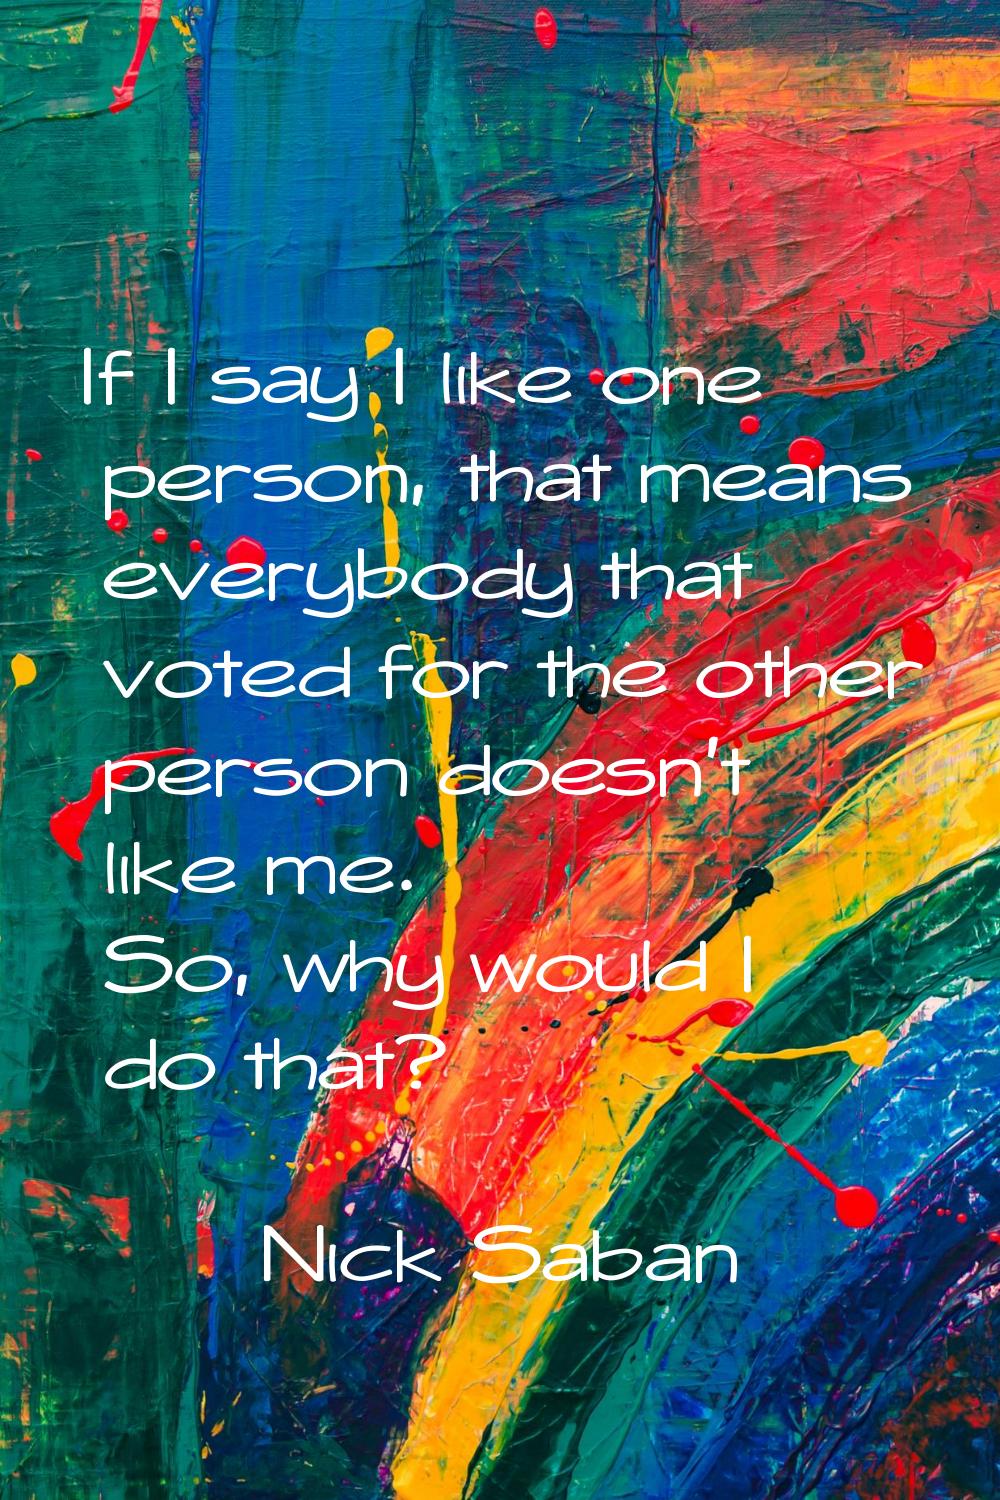 If I say I like one person, that means everybody that voted for the other person doesn't like me. S